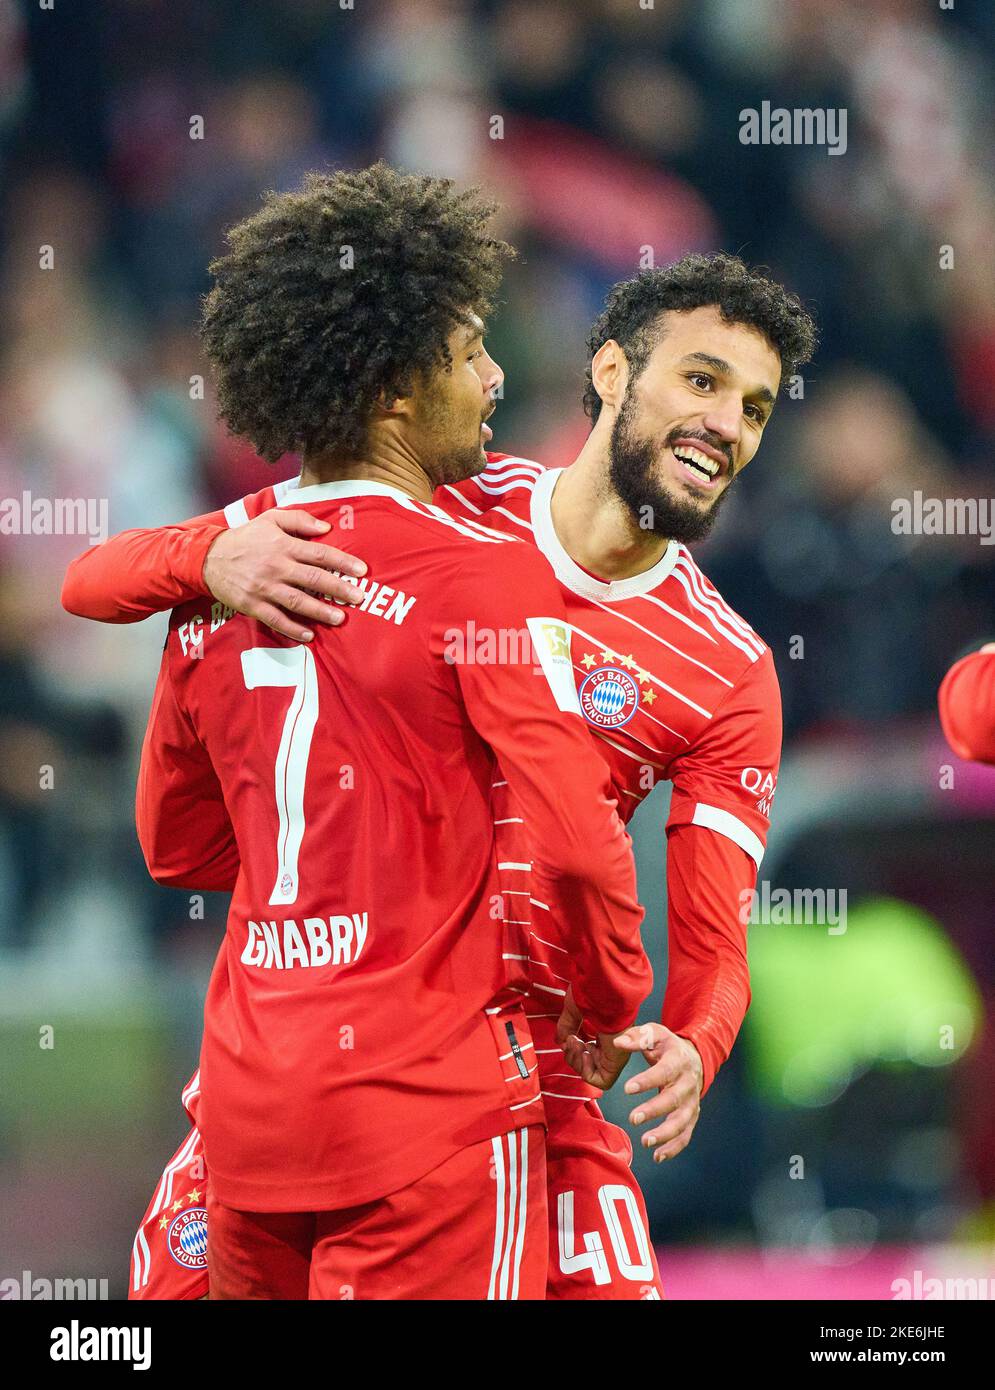 Serge GNABRY, FCB 7 celebrates his goal, happy, laugh, celebration, 5-1 with Noussair Mazraoui, FCB 40  in the match FC BAYERN MÜNCHEN - SV WERDER BREMEN 6-1 1.German Football League on Nov 8, 2022 in Munich, Germany. Season 2022/2023, matchday 14, 1.Bundesliga, FCB, München, 14.Spieltag © Peter Schatz / Alamy Live News    - DFL REGULATIONS PROHIBIT ANY USE OF PHOTOGRAPHS as IMAGE SEQUENCES and/or QUASI-VIDEO - Stock Photo